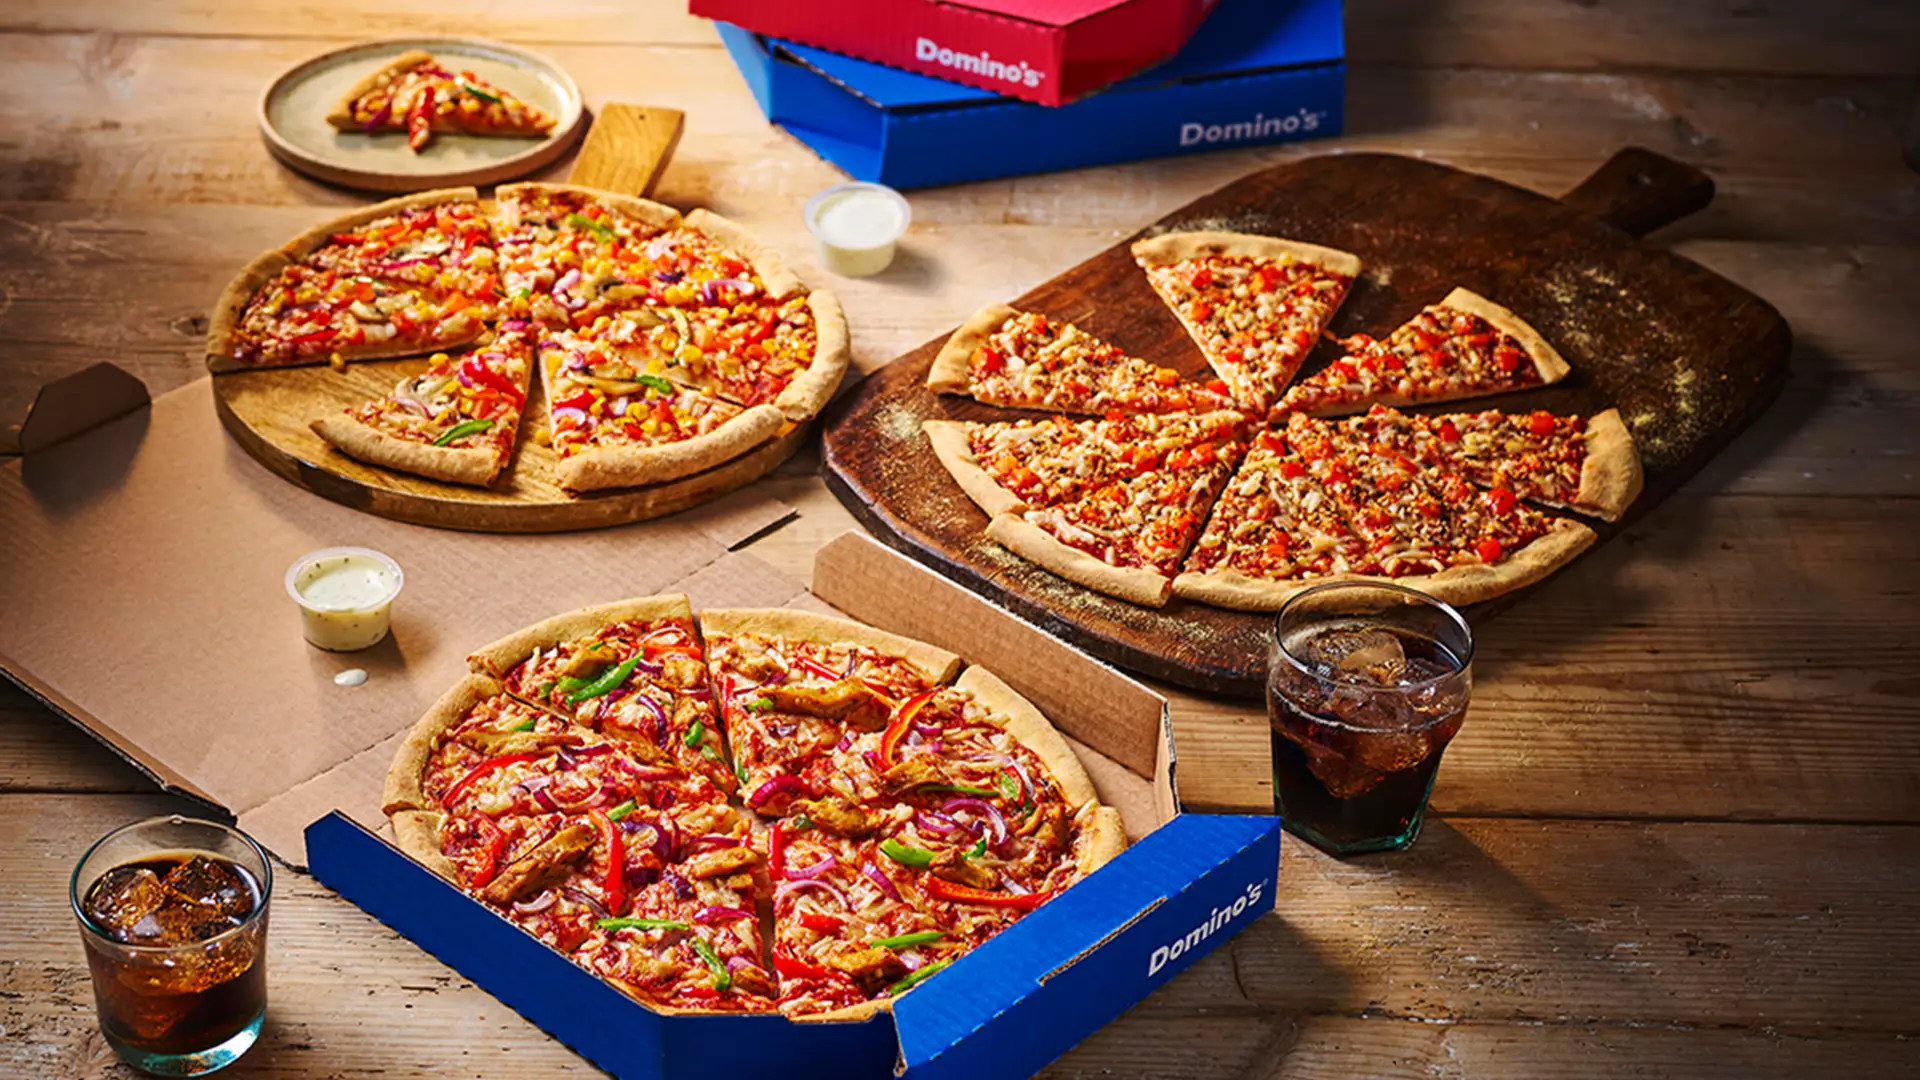 On the 4th January, Domino's will expand its already existing plant based range (